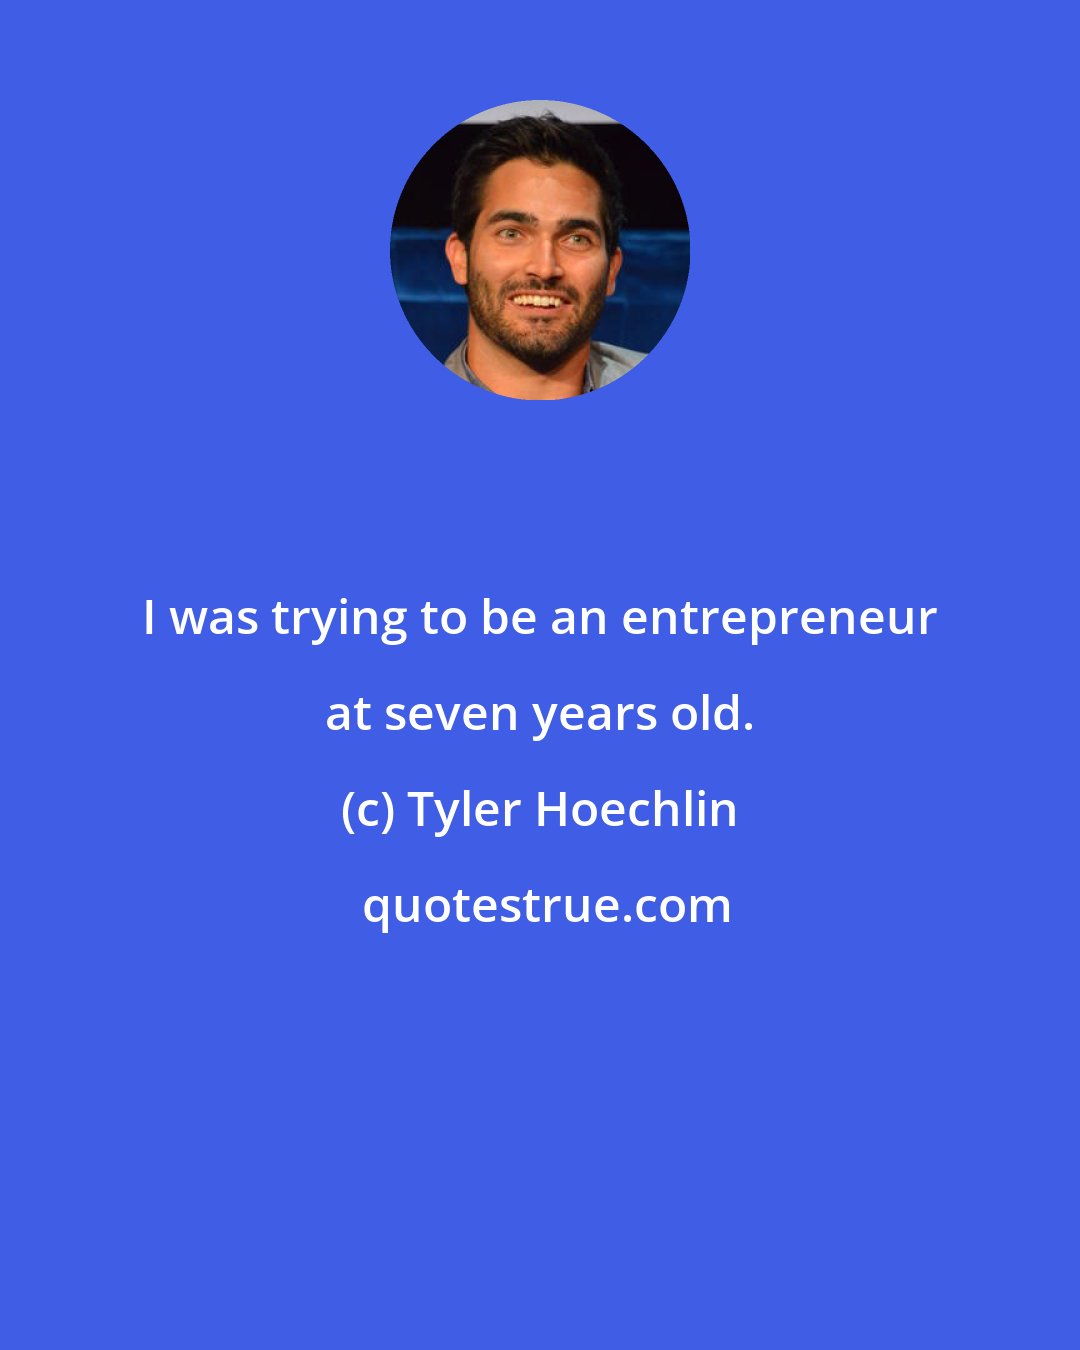 Tyler Hoechlin: I was trying to be an entrepreneur at seven years old.